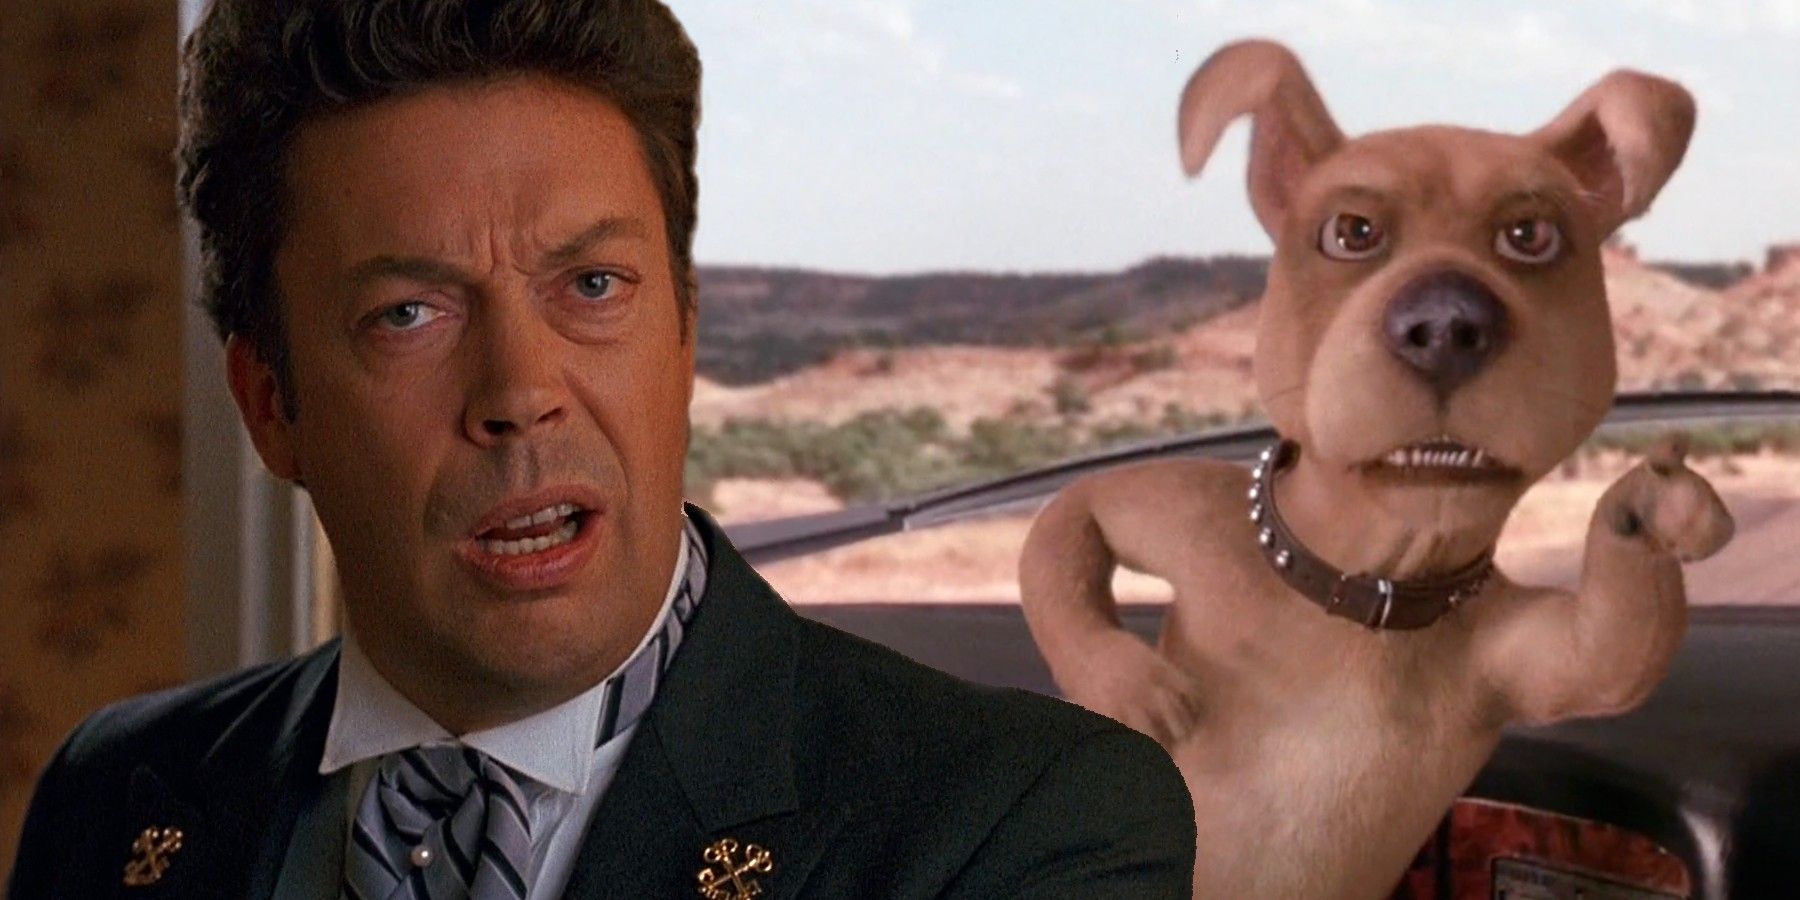 Scooby-Doo - Tim Curry and Scrappy-Doo